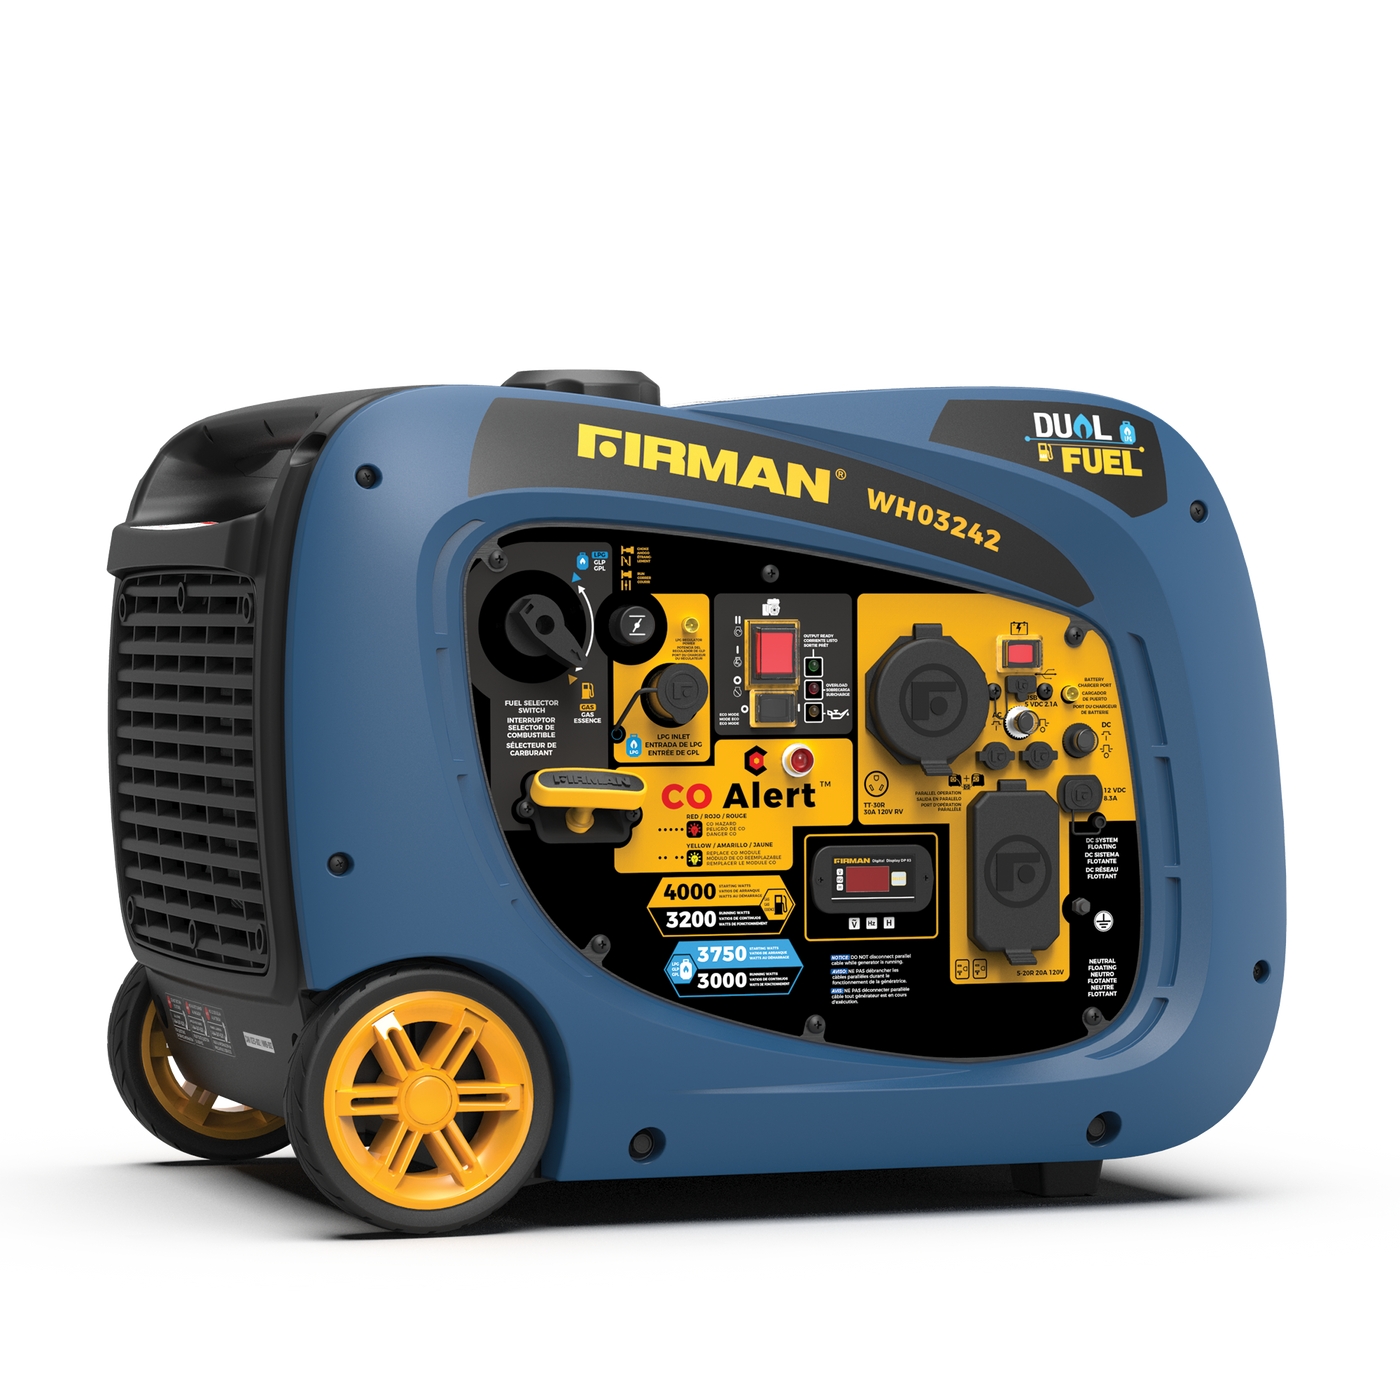 Dual Fuel Inverter Portable Generator 4000W Electric Start with CO